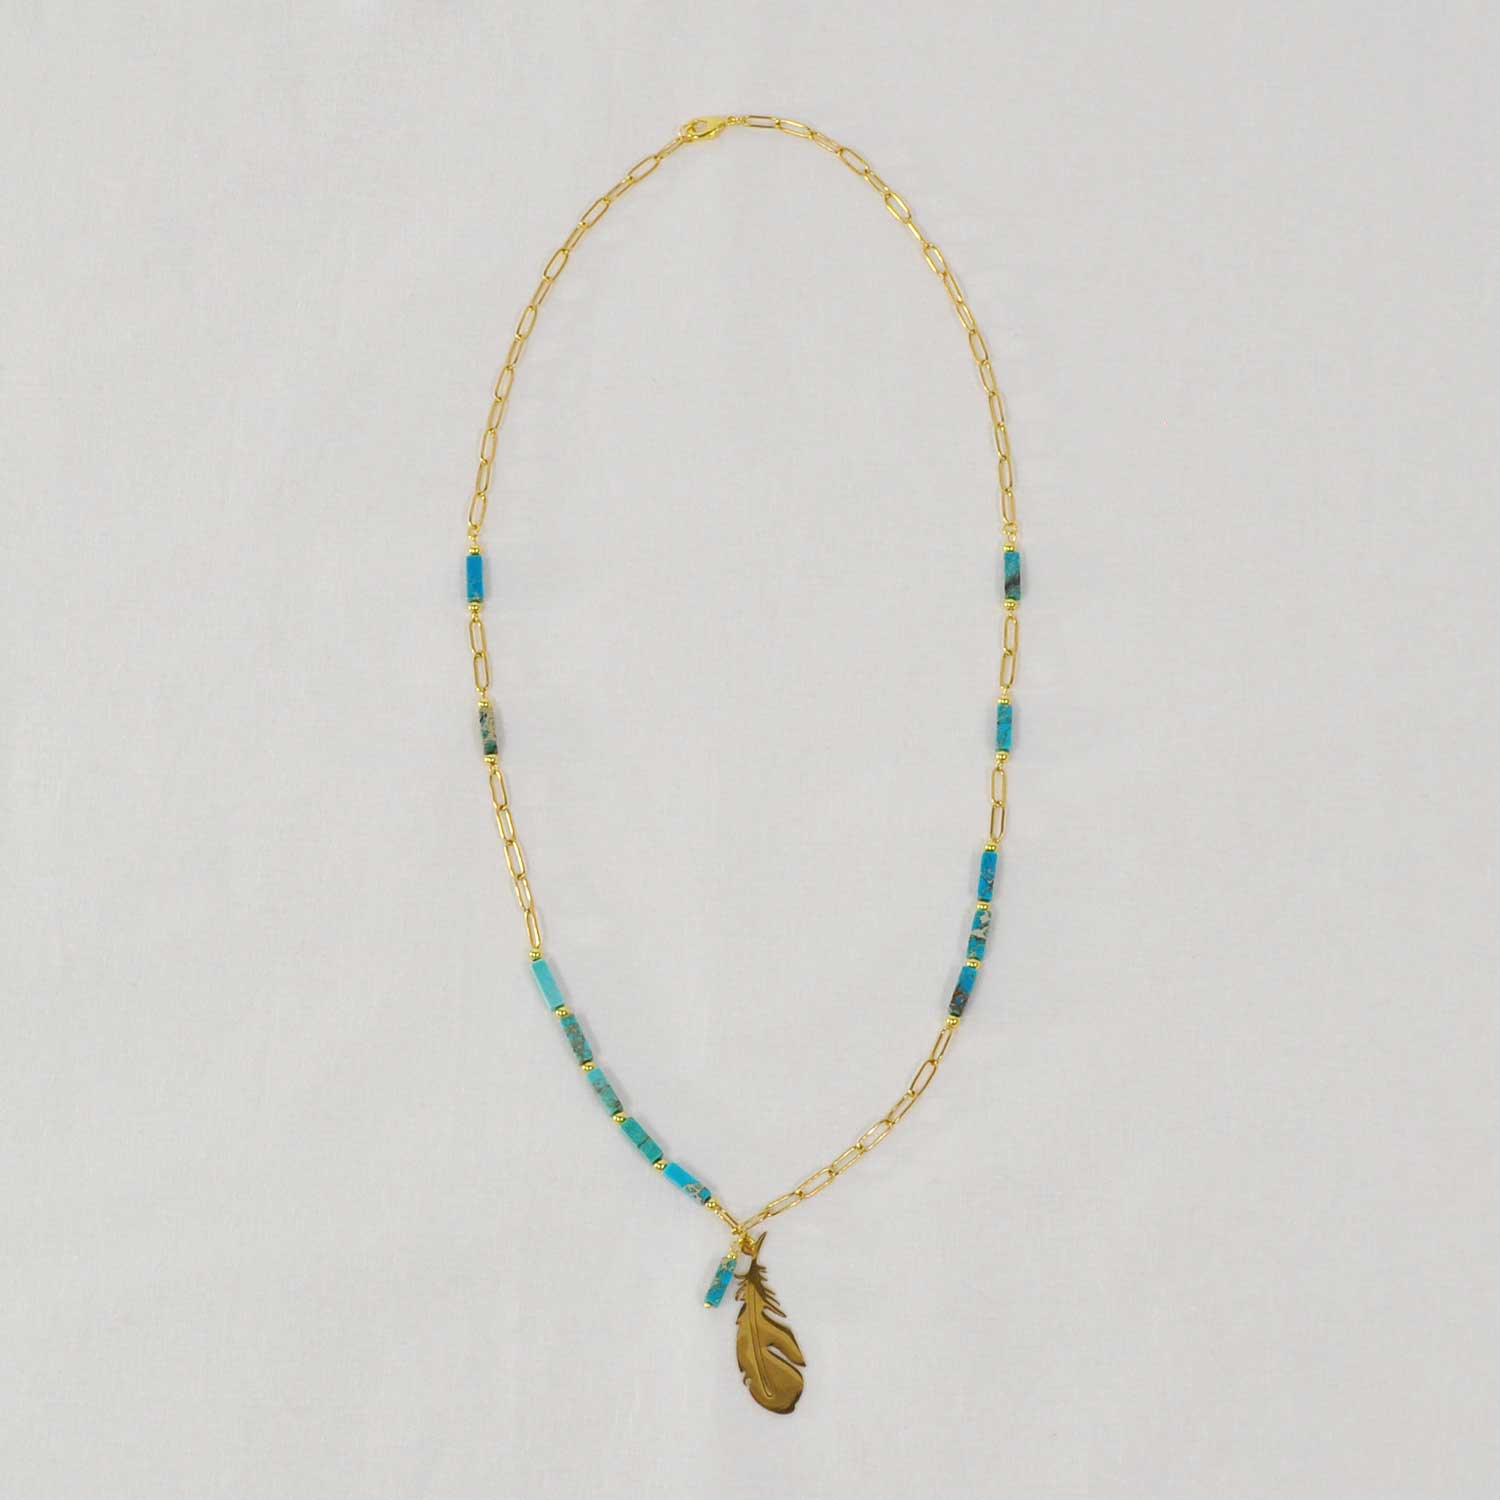 Long feather necklace